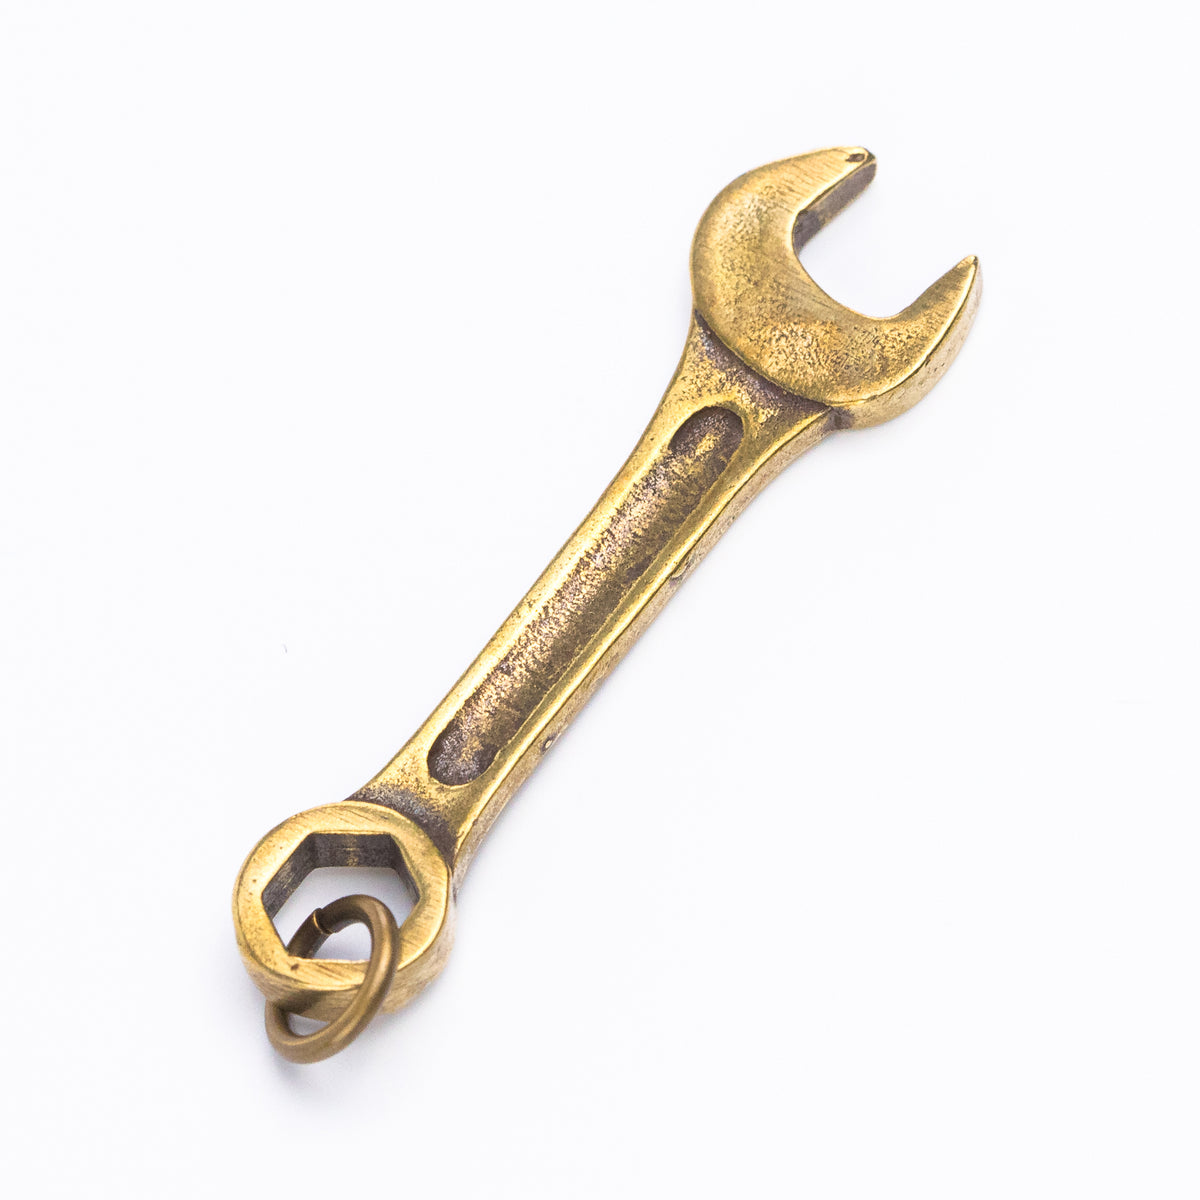 Metal Wrench Key Chain – The Official FNA Store